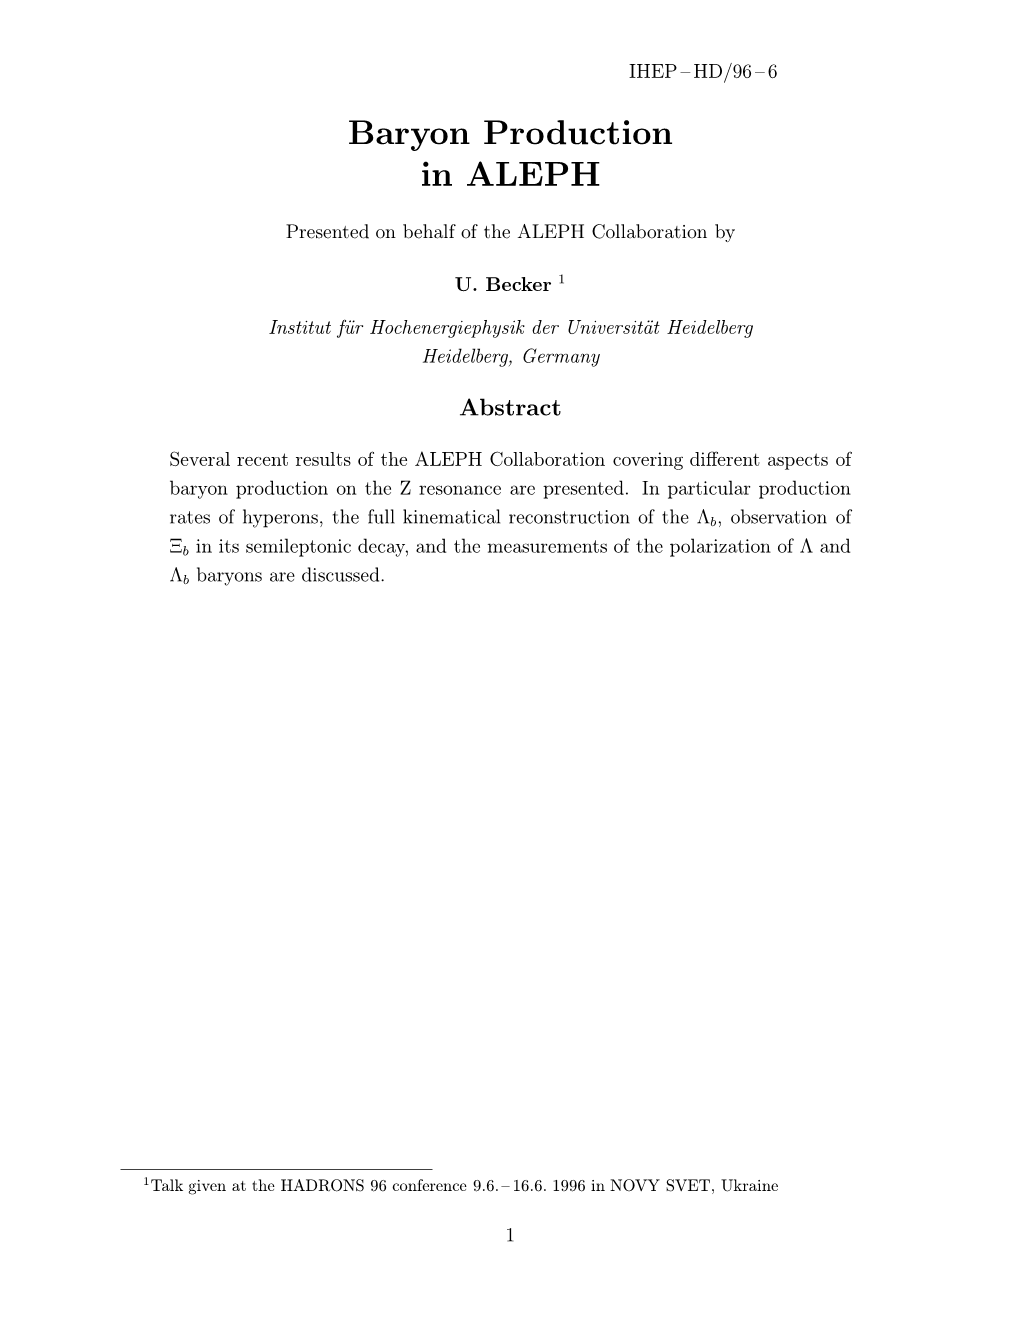 Baryon Production in ALEPH